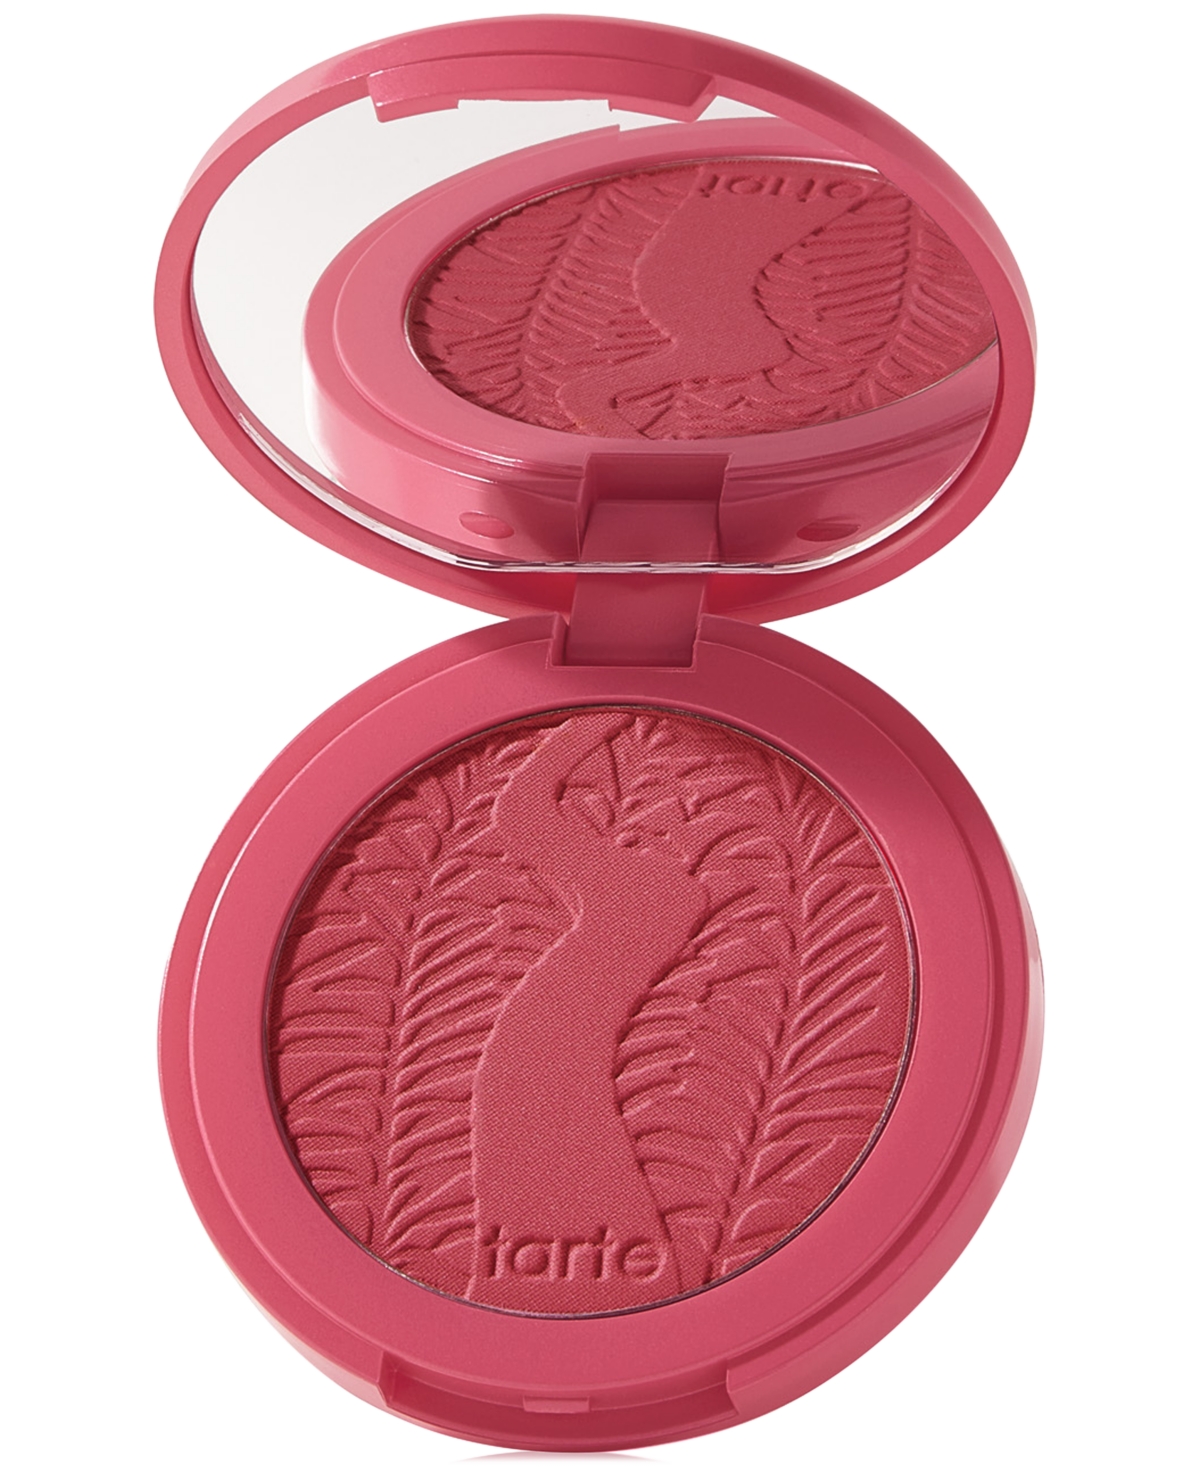 Tarte Amazonian Clay 12-hour Blush In Fearless